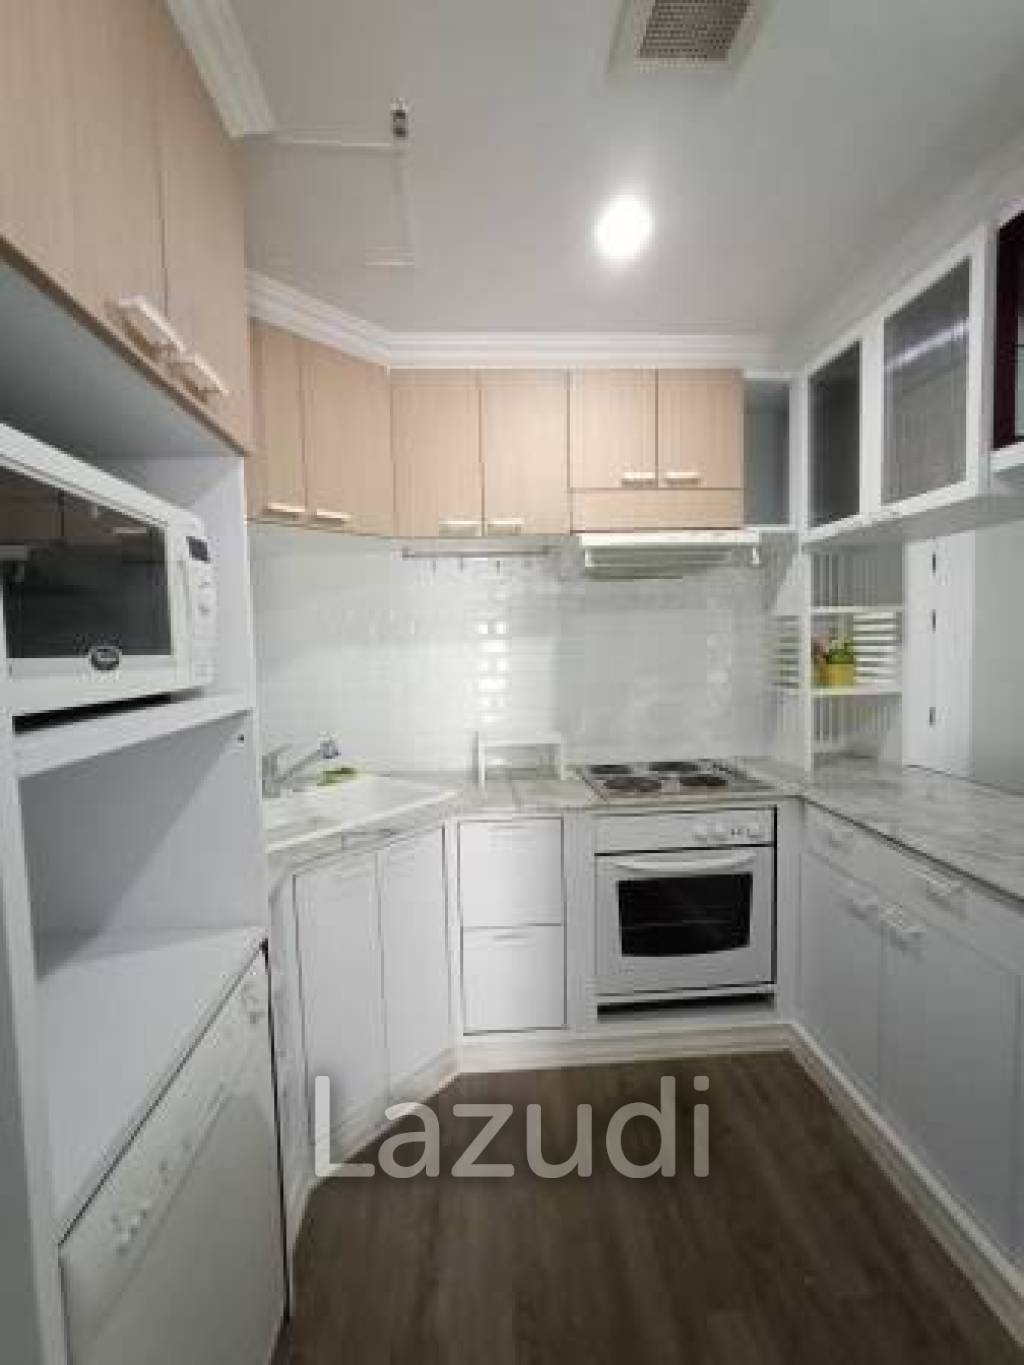 Asoke Place 2 bedroom property for sale with tenant